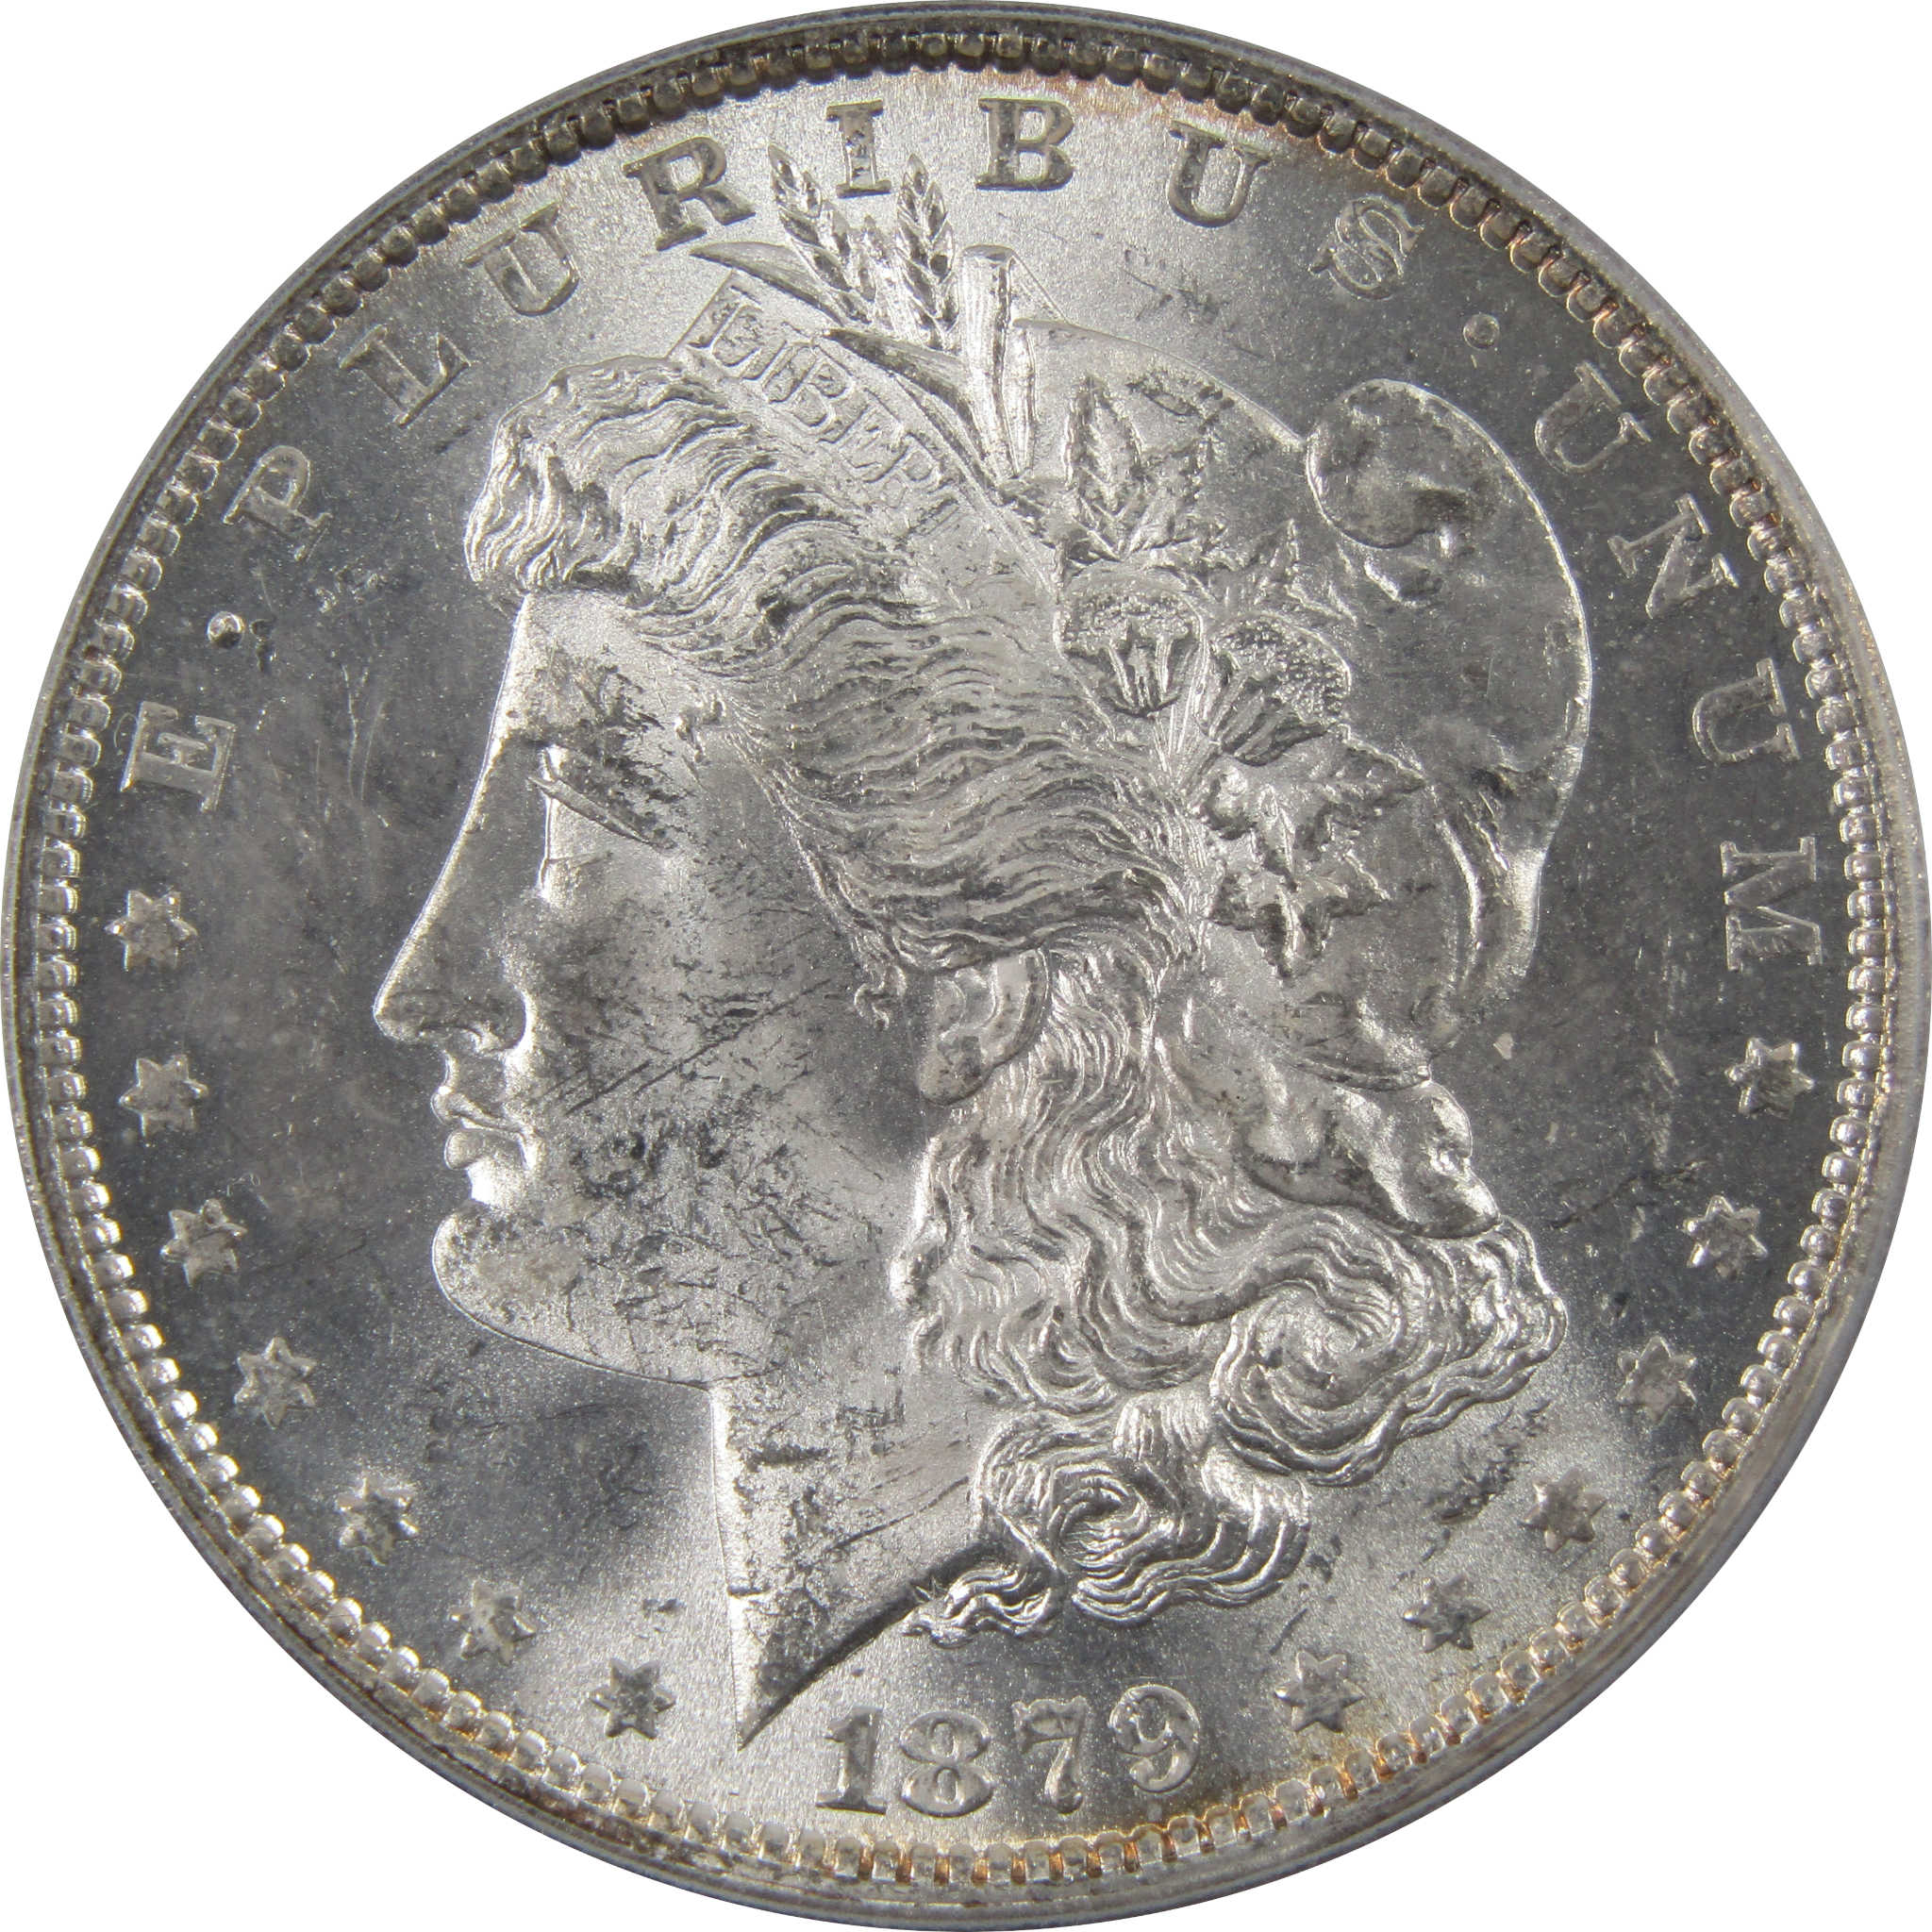 1879 O Morgan Dollar MS 63 PCGS 90% Silver $1 Uncirculated SKU:I9376 - Morgan coin - Morgan silver dollar - Morgan silver dollar for sale - Profile Coins &amp; Collectibles